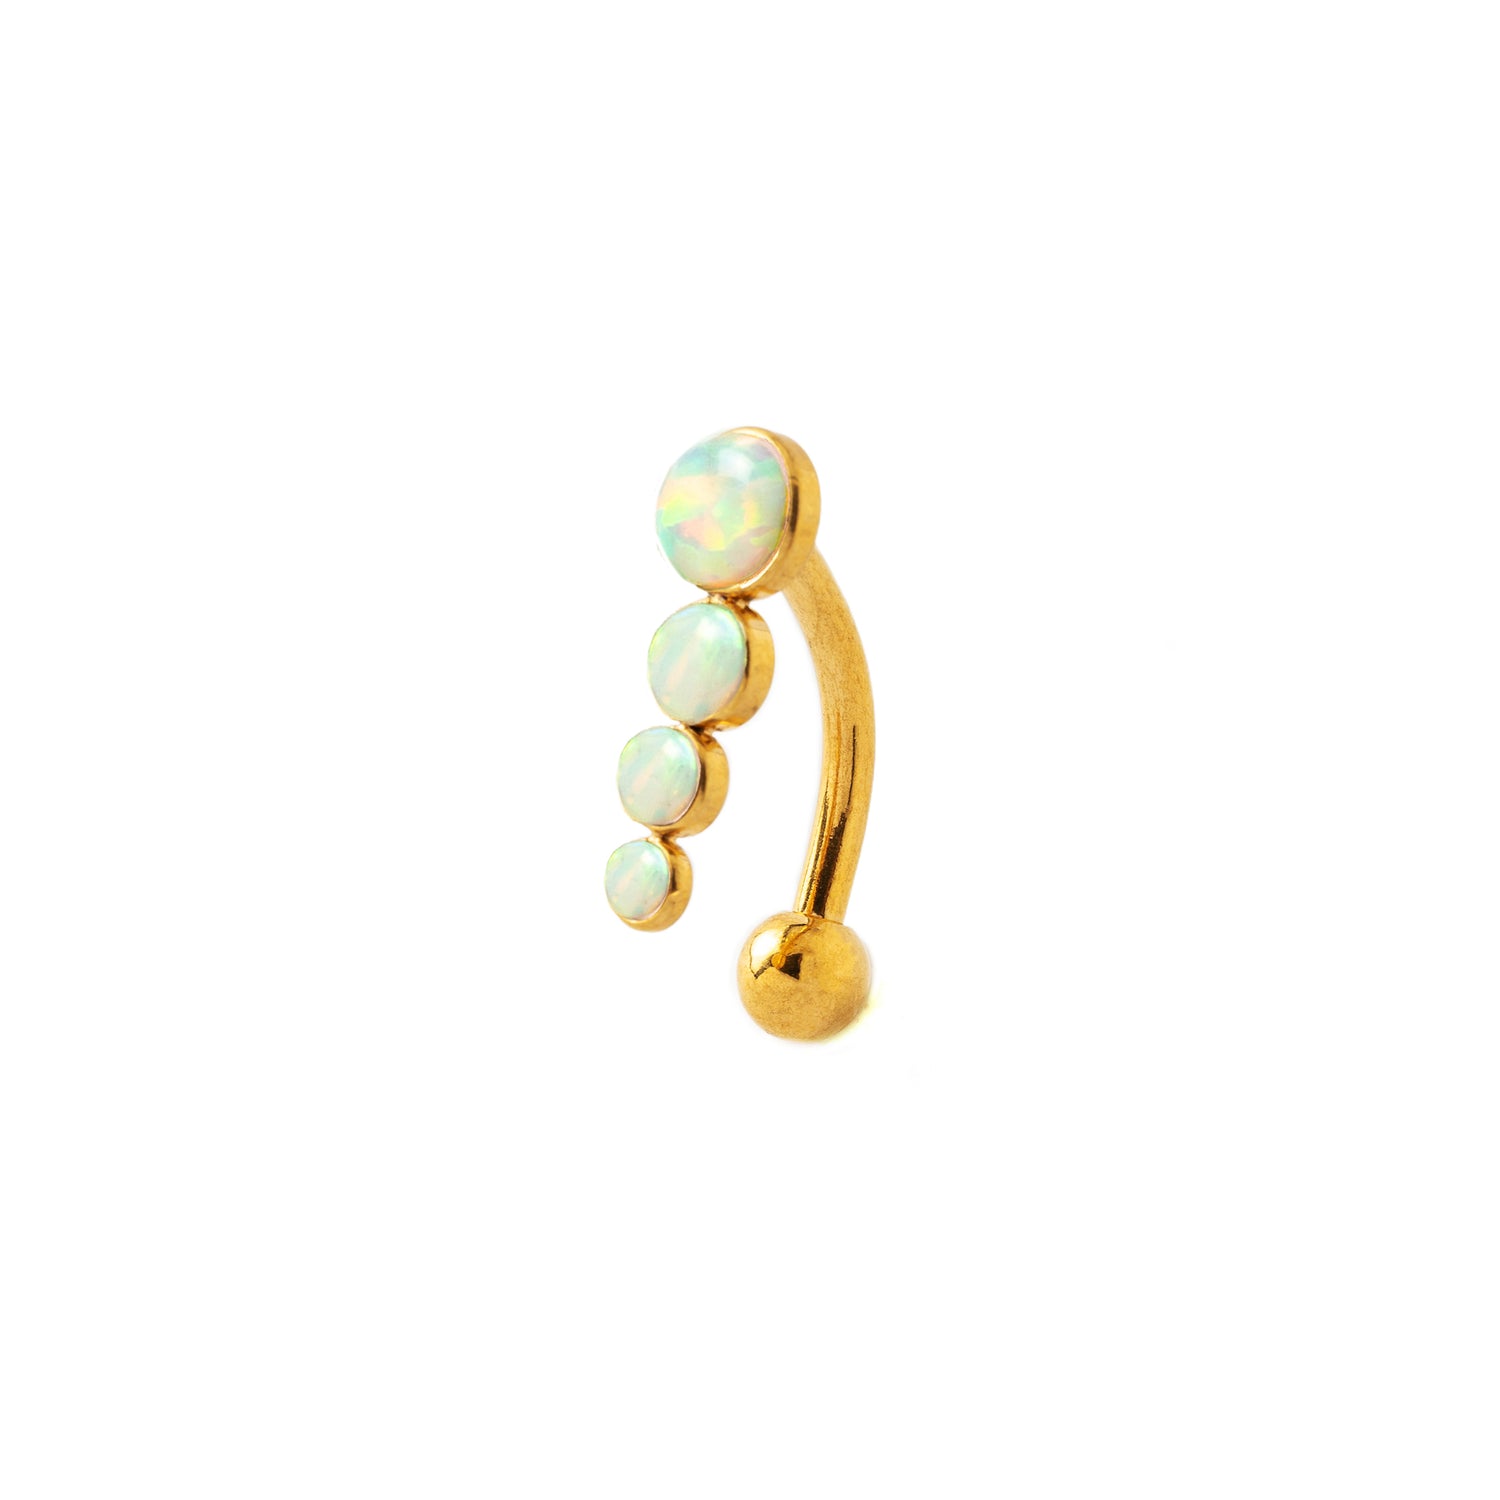 Newton golden surgical steel navel piercing with White Opal right side view